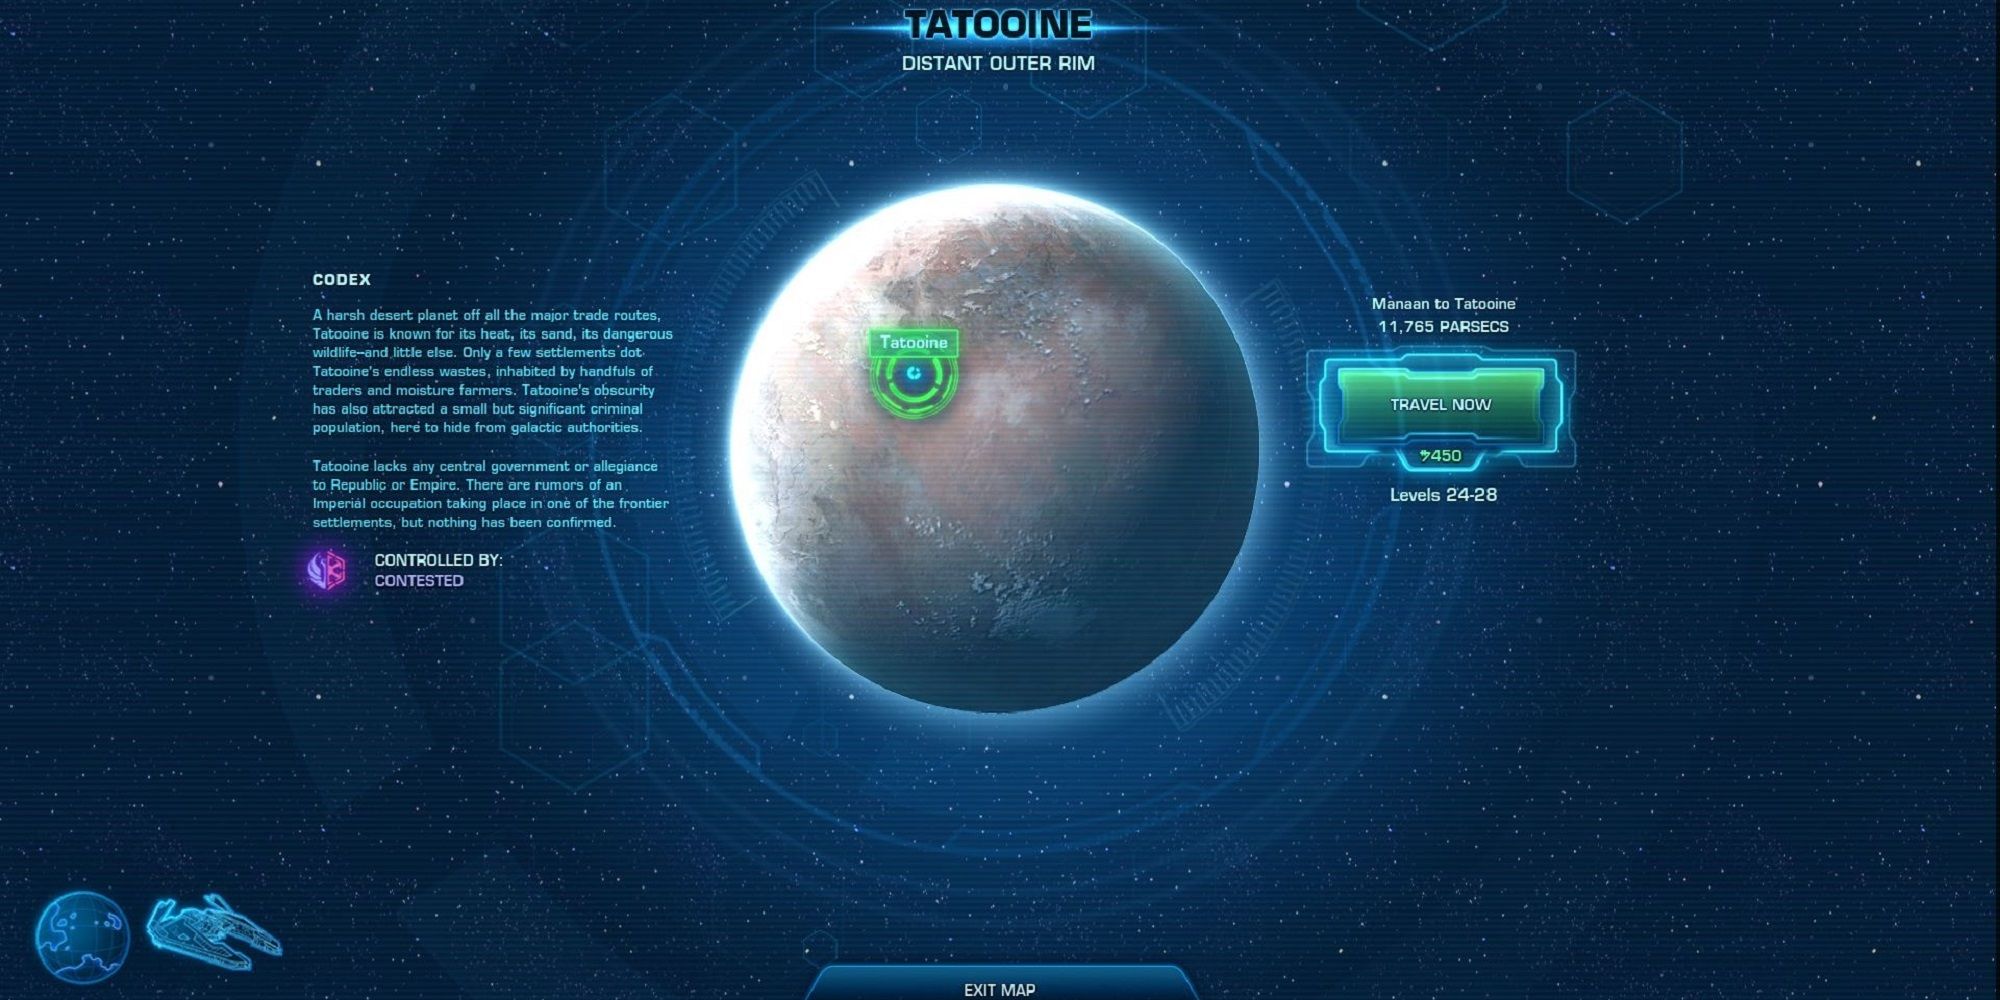 SWTOR's galaxy map interface after selecting Tatooine